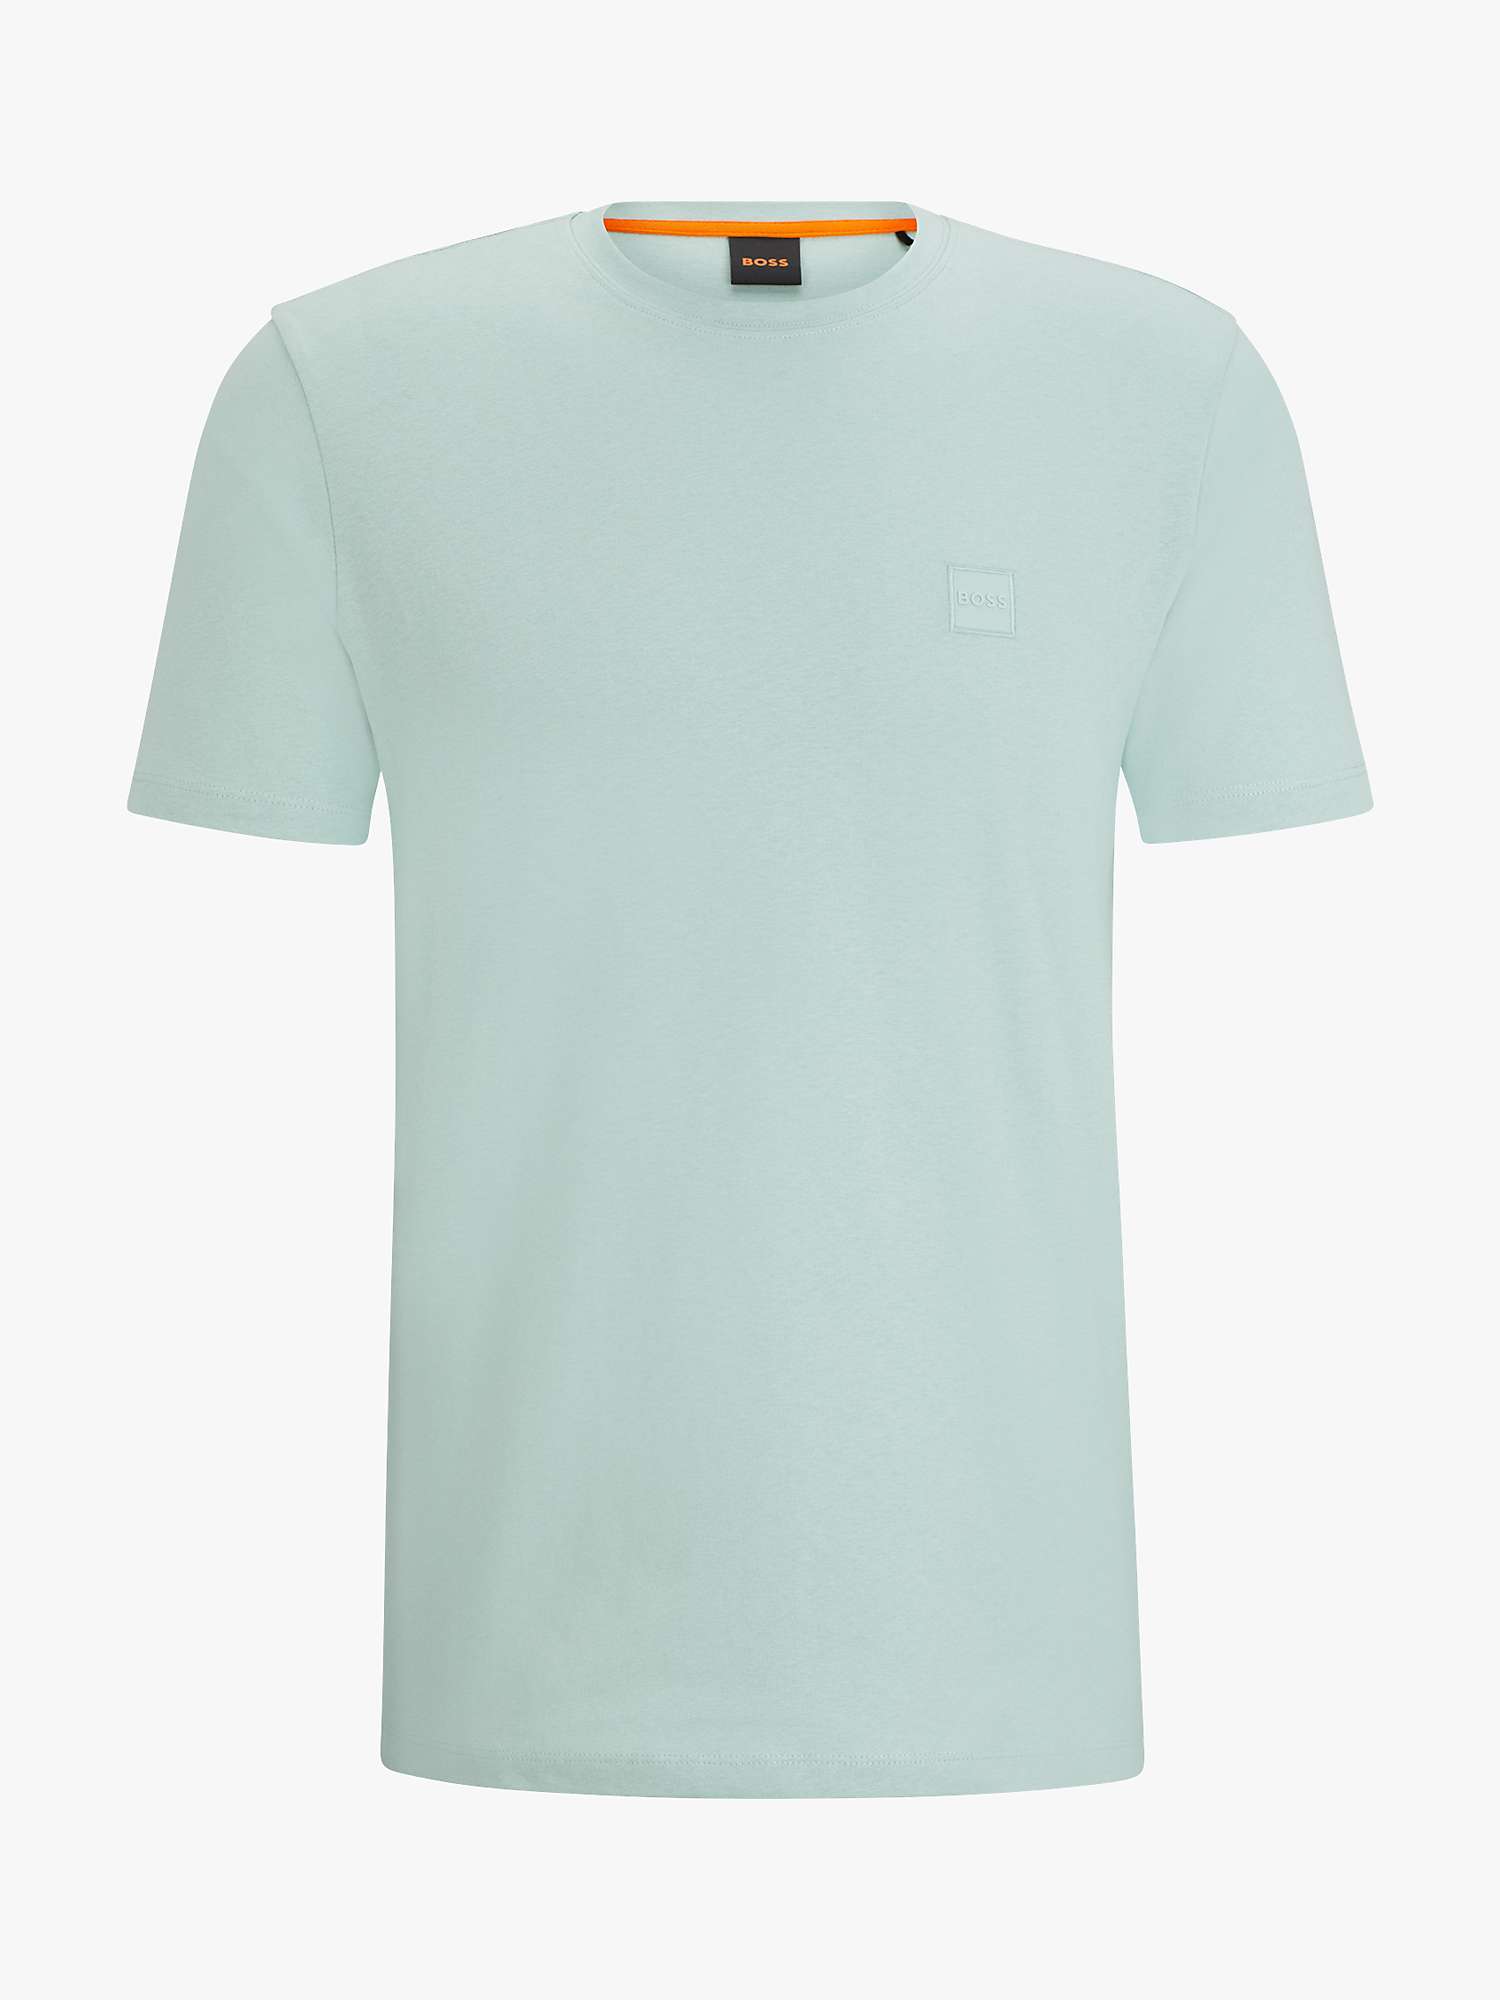 Buy BOSS Tales 446 Short Sleeve T-Shirt, Turquoise Online at johnlewis.com